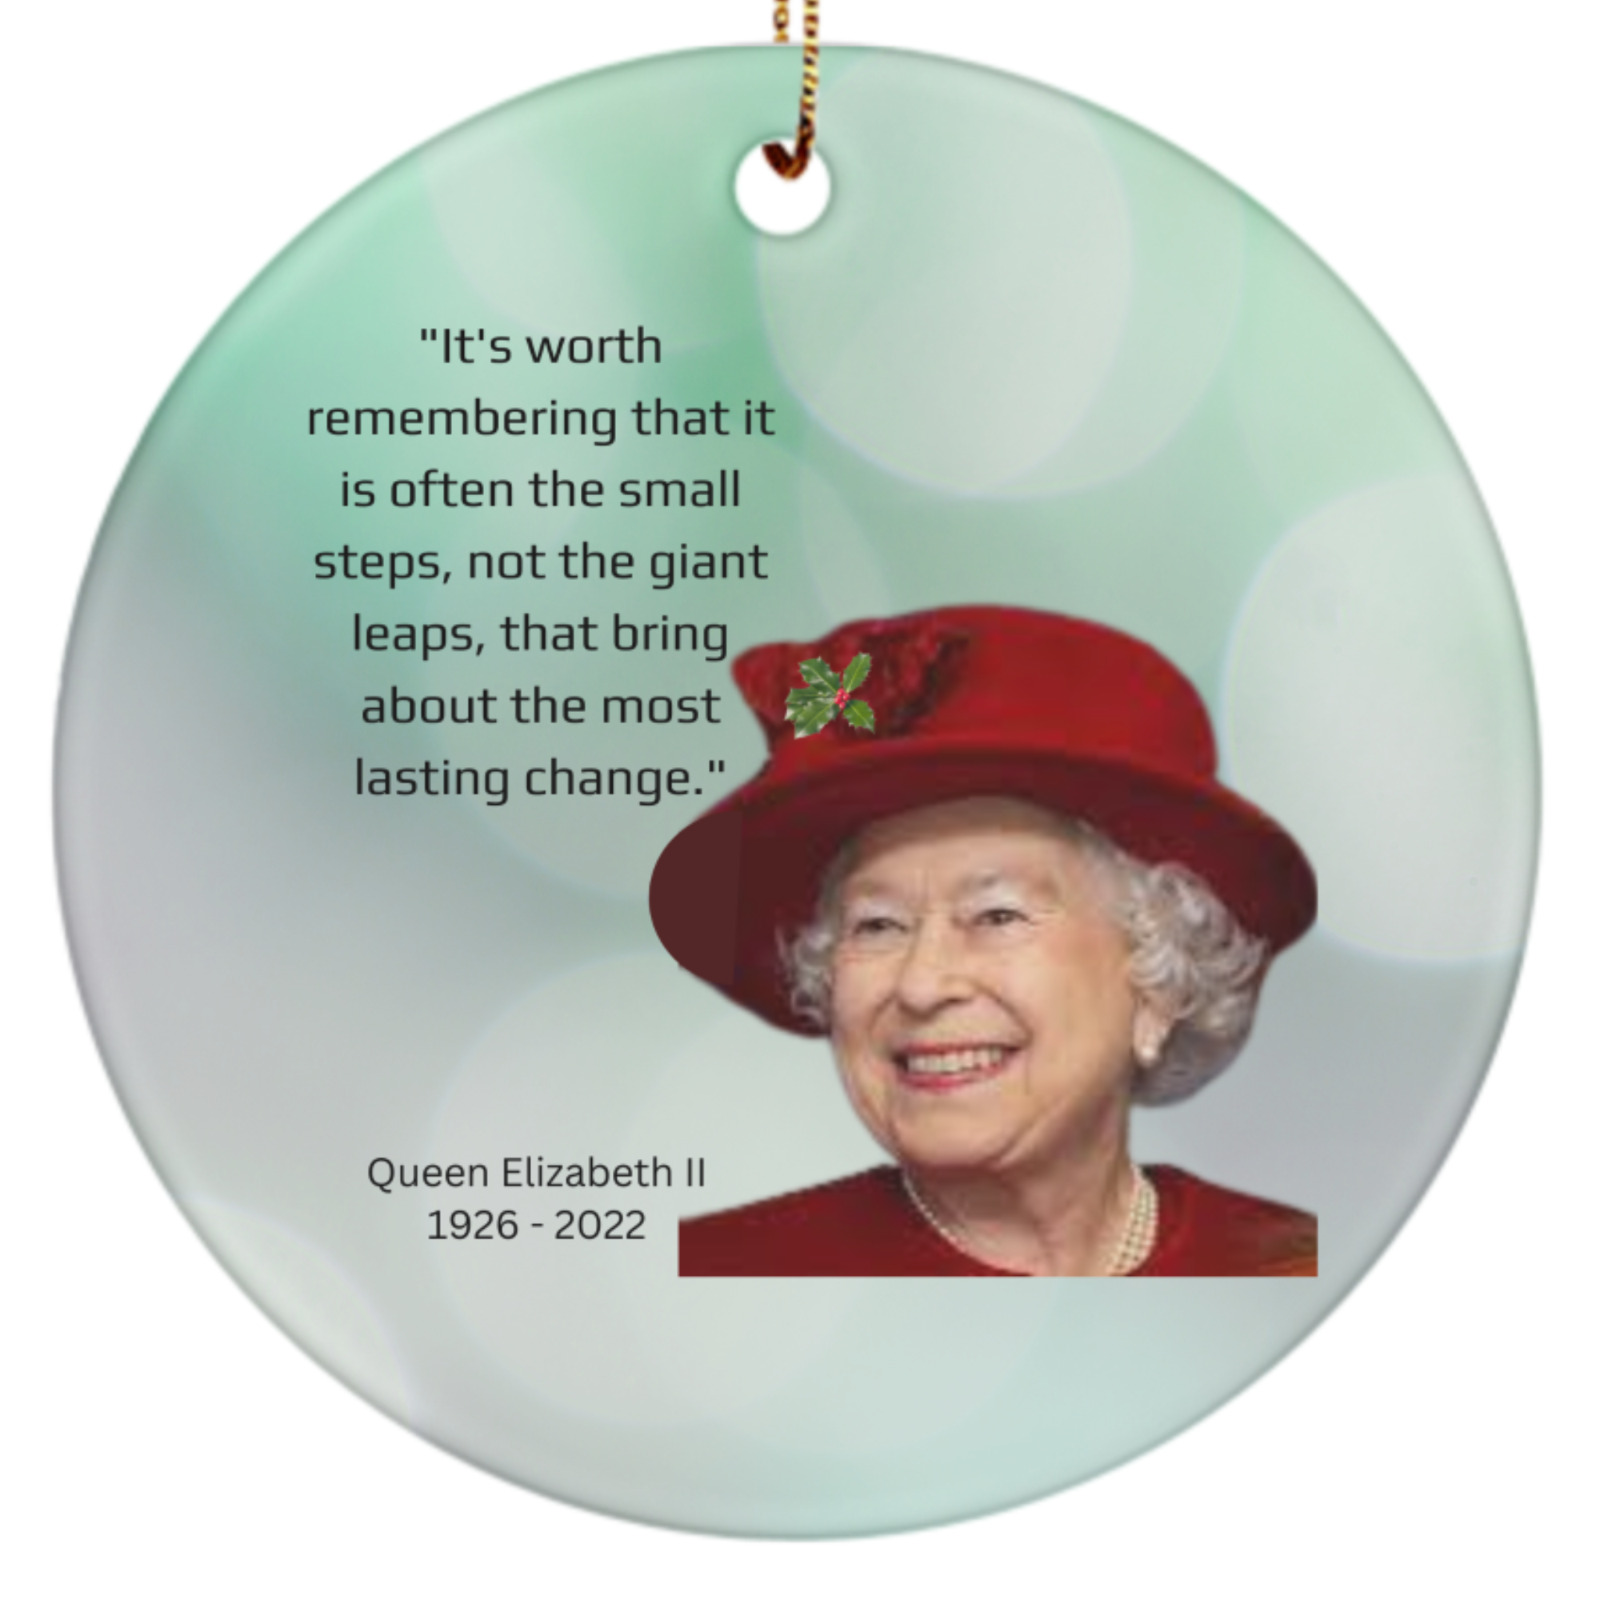 Queen Elizabeth II Memorial Holiday Ceramic Christmas Tree Ornament with Quote